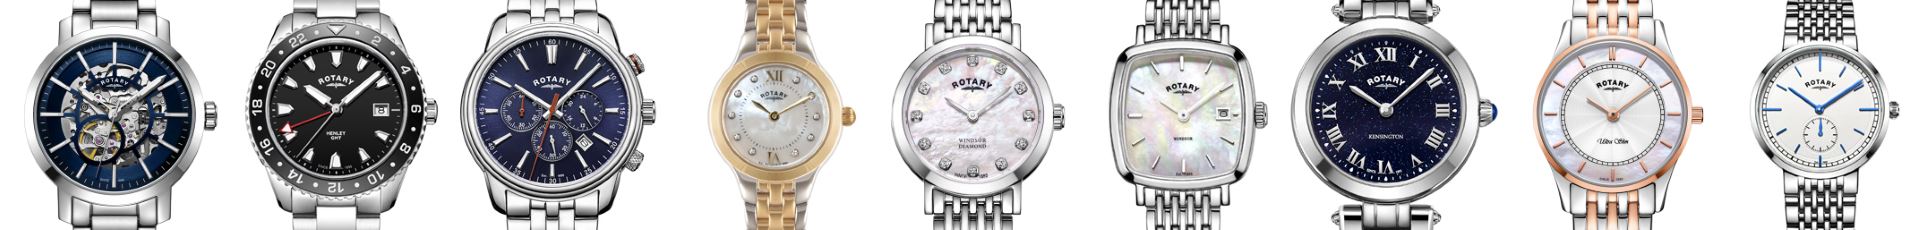 Ladies and Gents Rotary Watches in Carlisle, Cumbria from Nicholson & Coulthard Jewellers